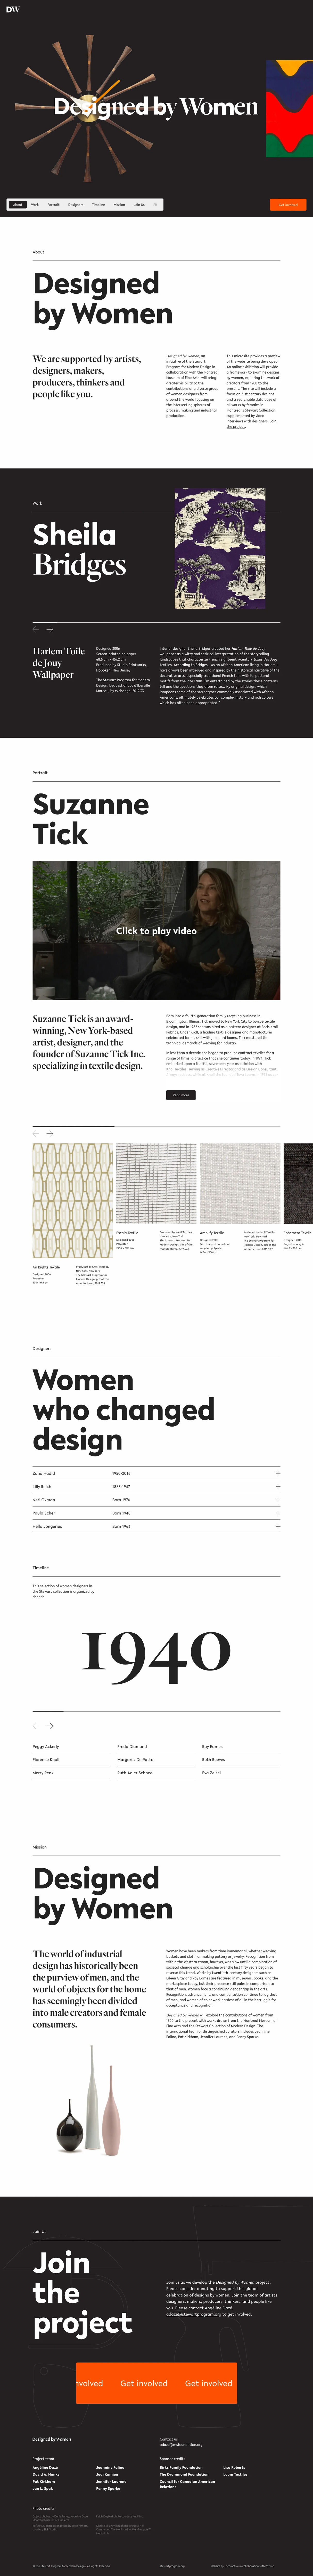 Designed by Women Landing Page Example: Designed by Women, a microsite developed by the Stewart Program for Modern Design, explores international design from 1900 to the present.